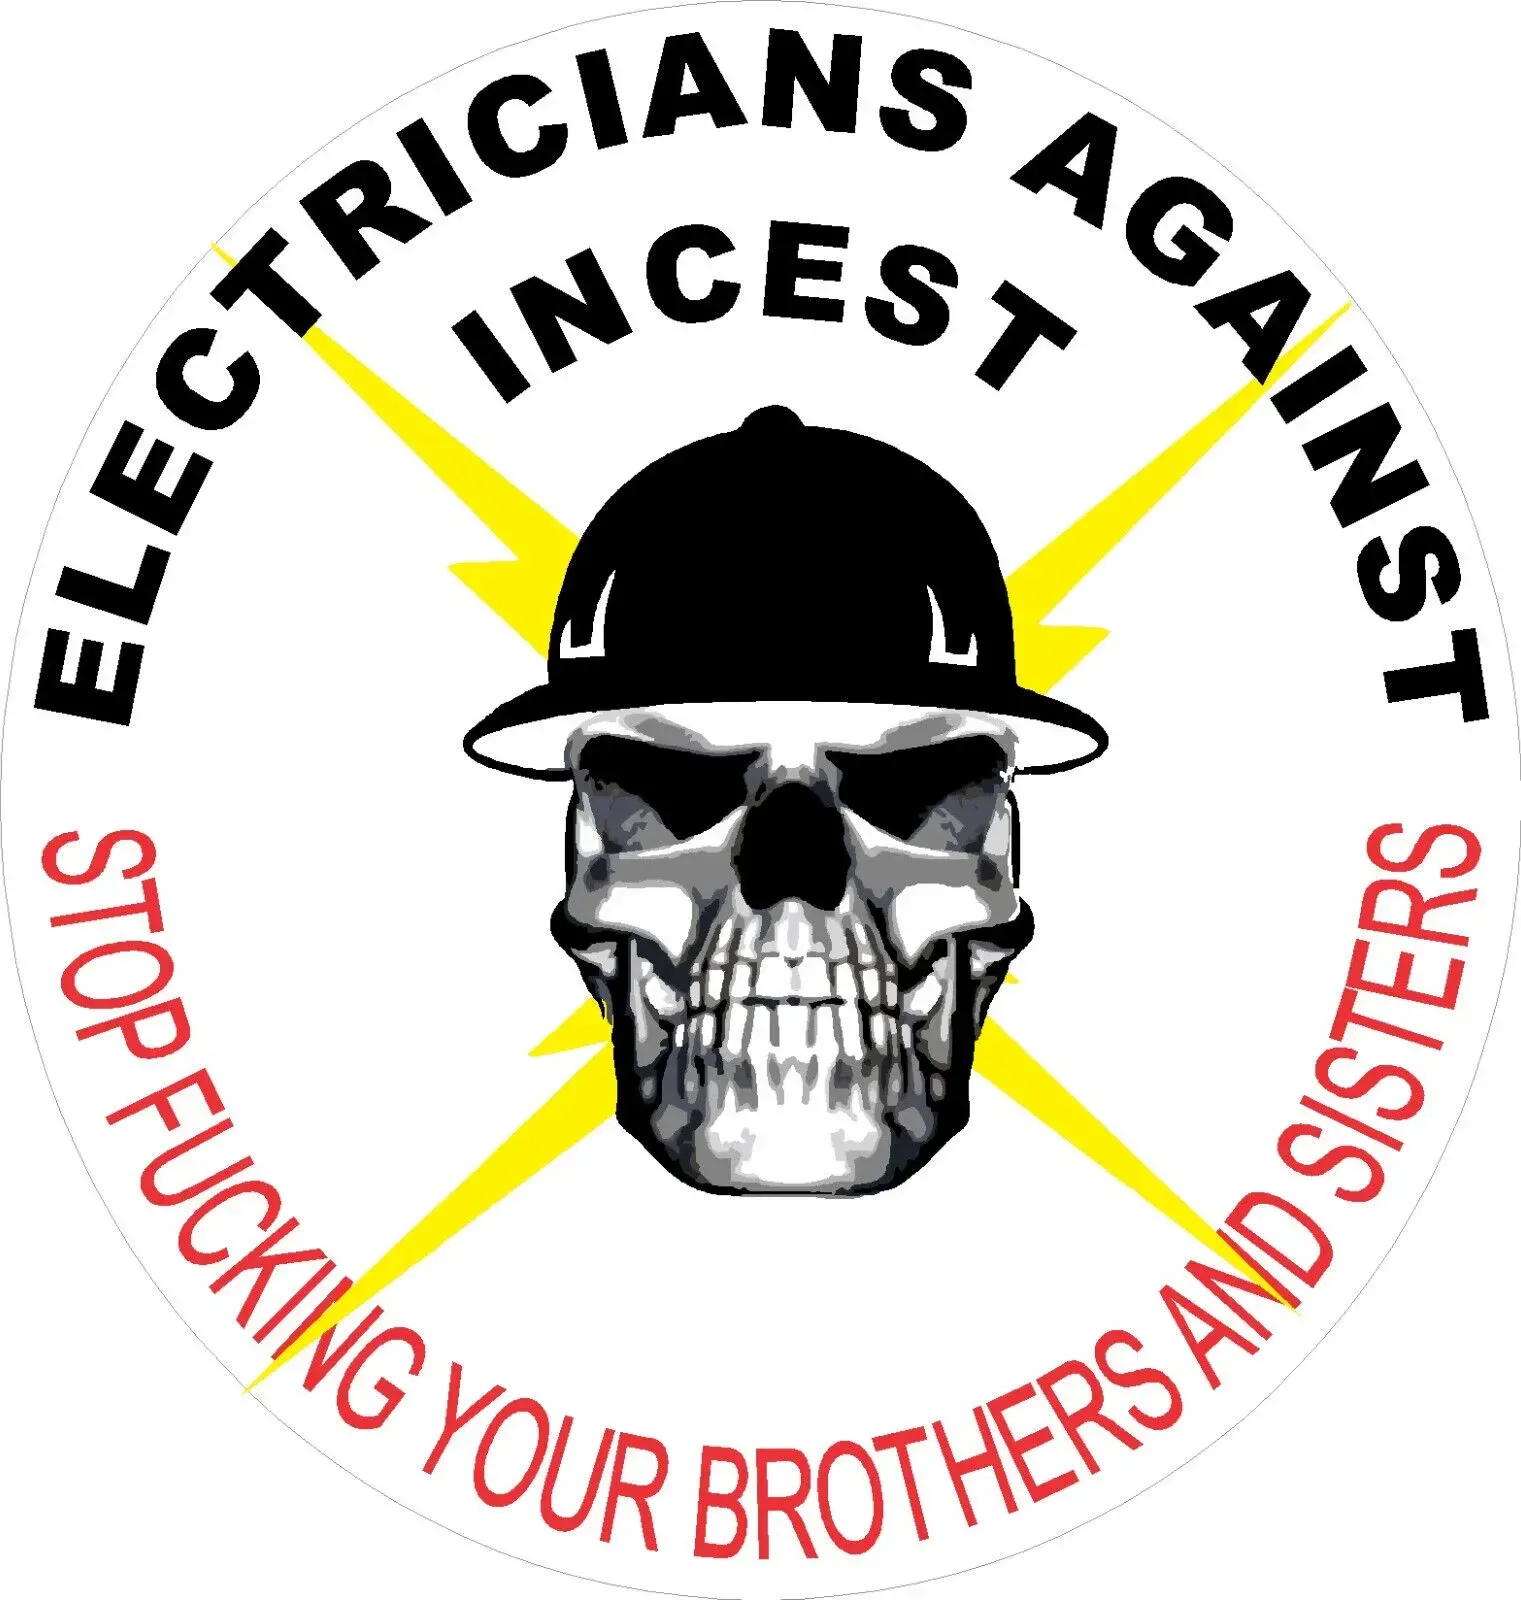 Avatar of Electricians Against Incest